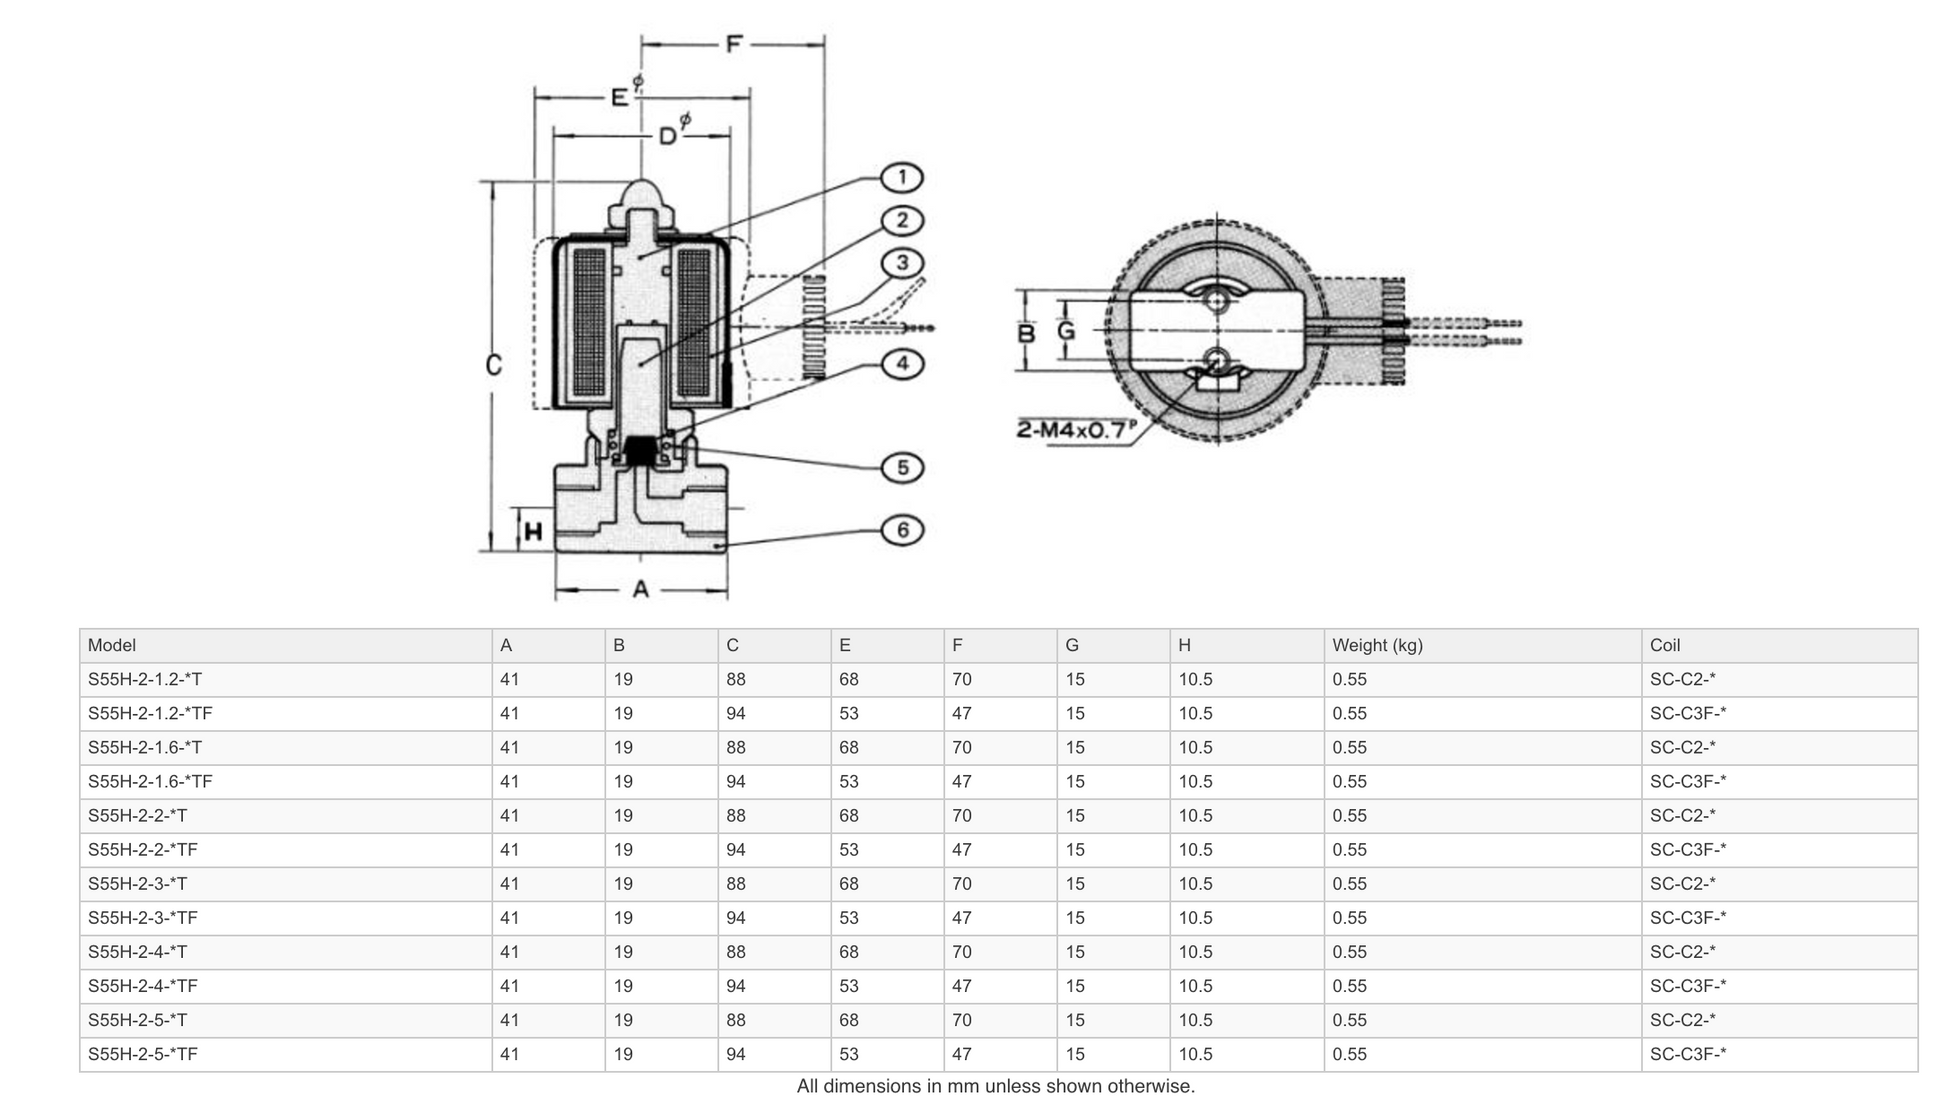 Dimensions - GO Solenoid Valve 1/4" S55H 316 Stainless High Pressure Normally Closed Range